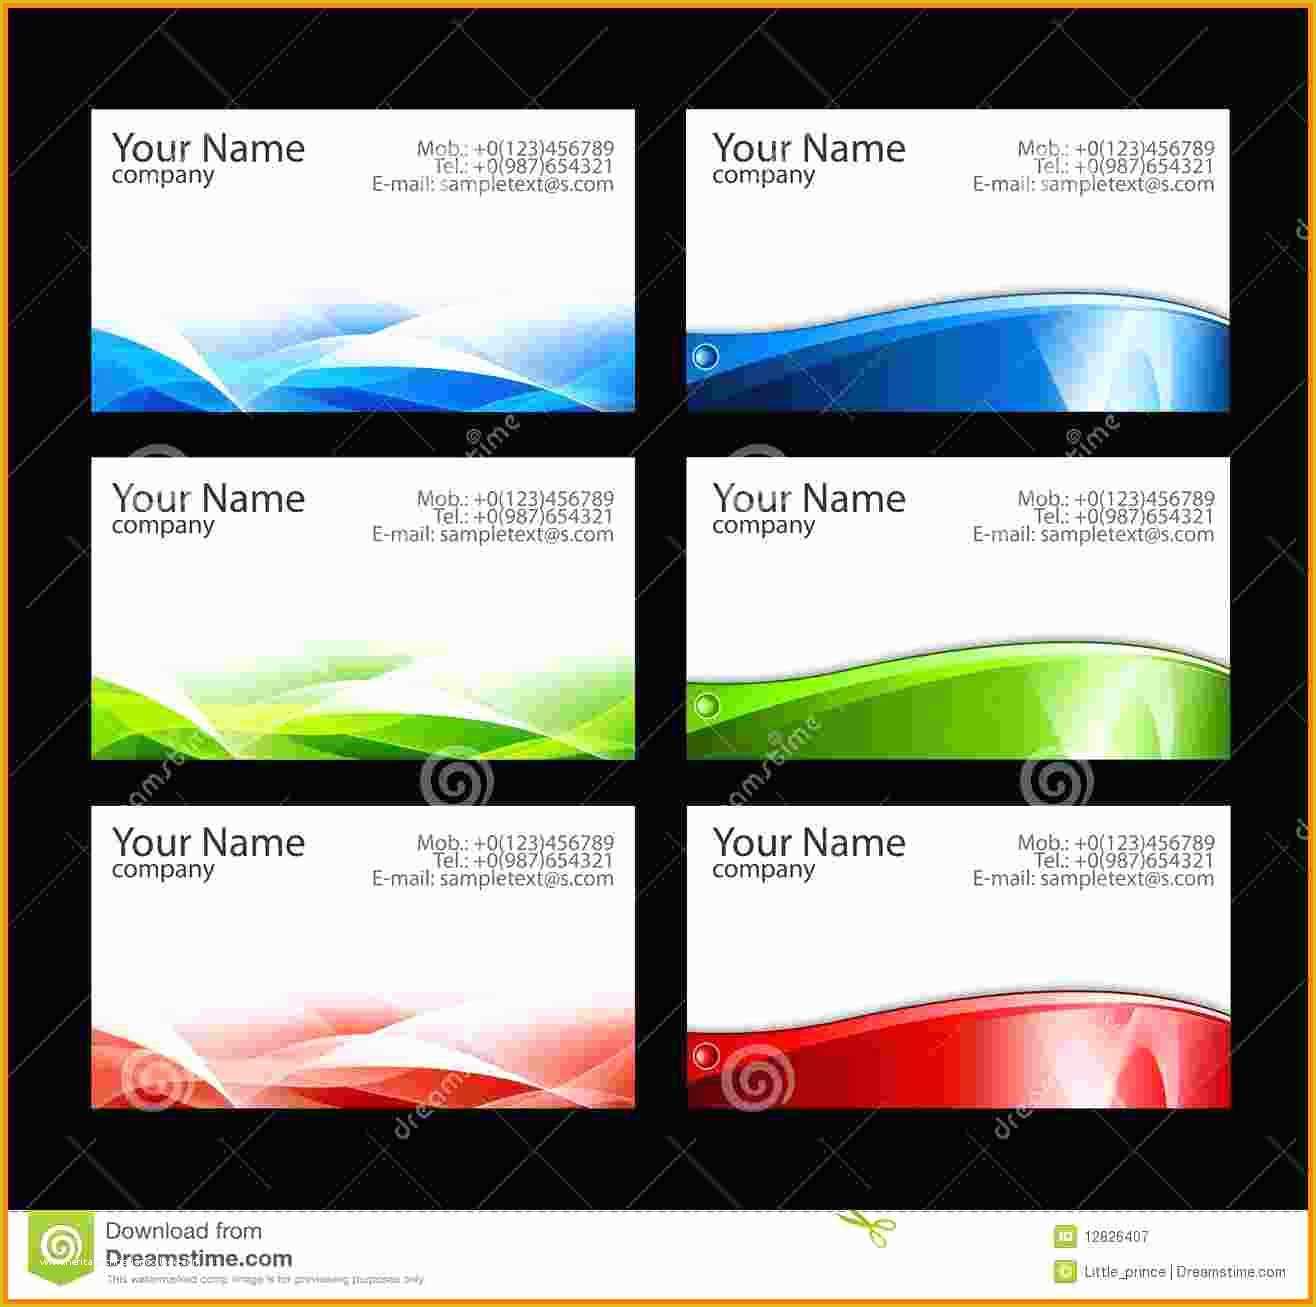 Business Card Template for Free Printable Of 9 Blank Business Card Template Illustrator